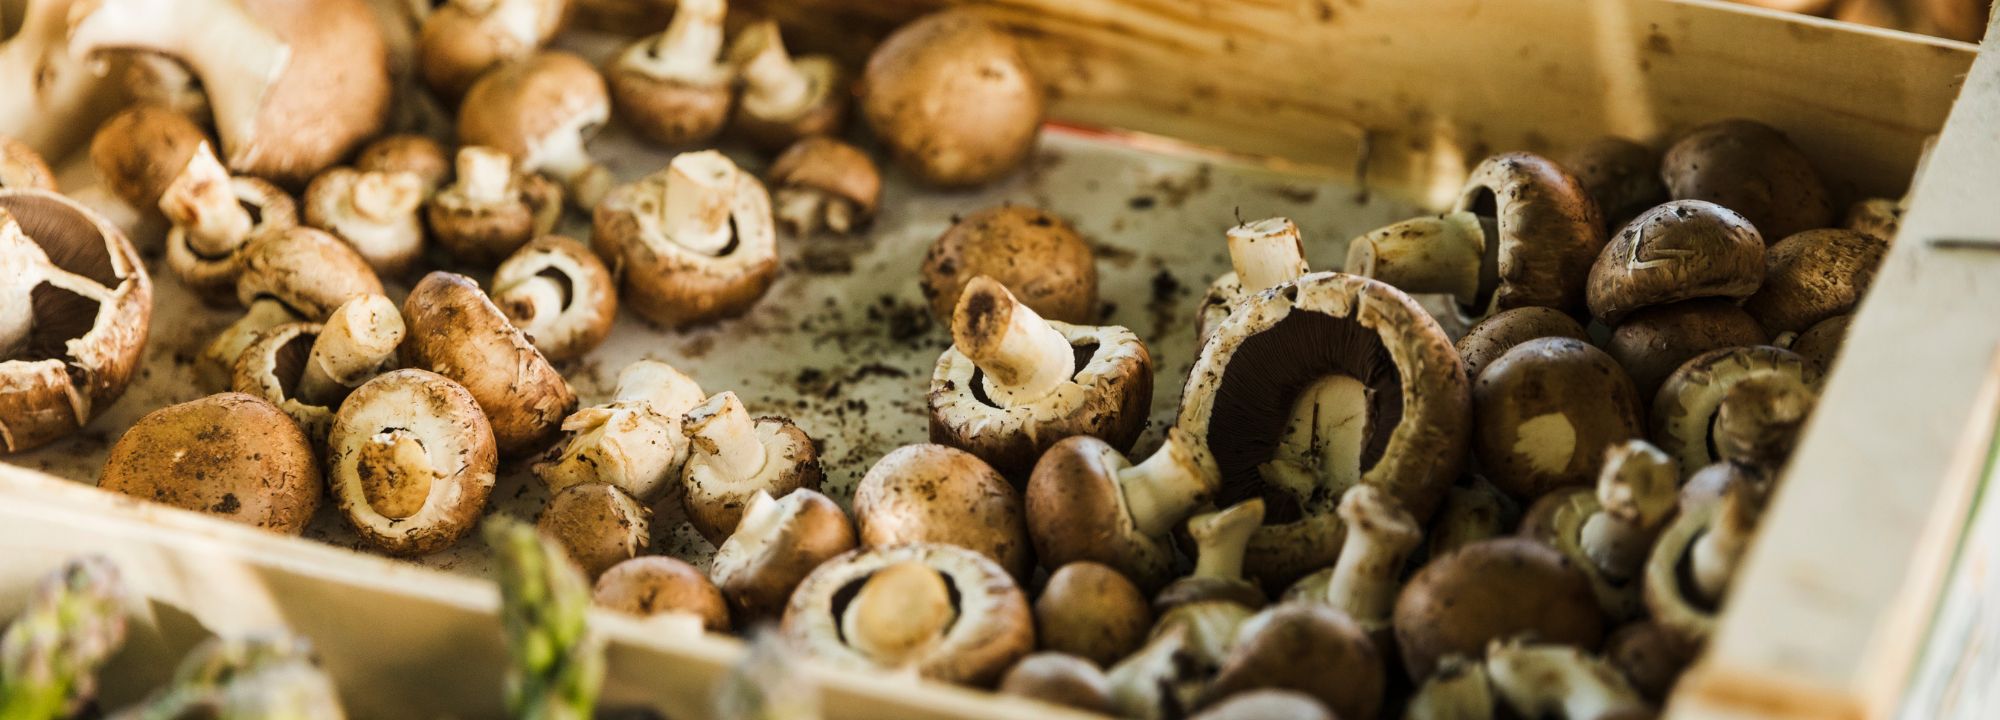 a beginner s guide to growing your own mushrooms